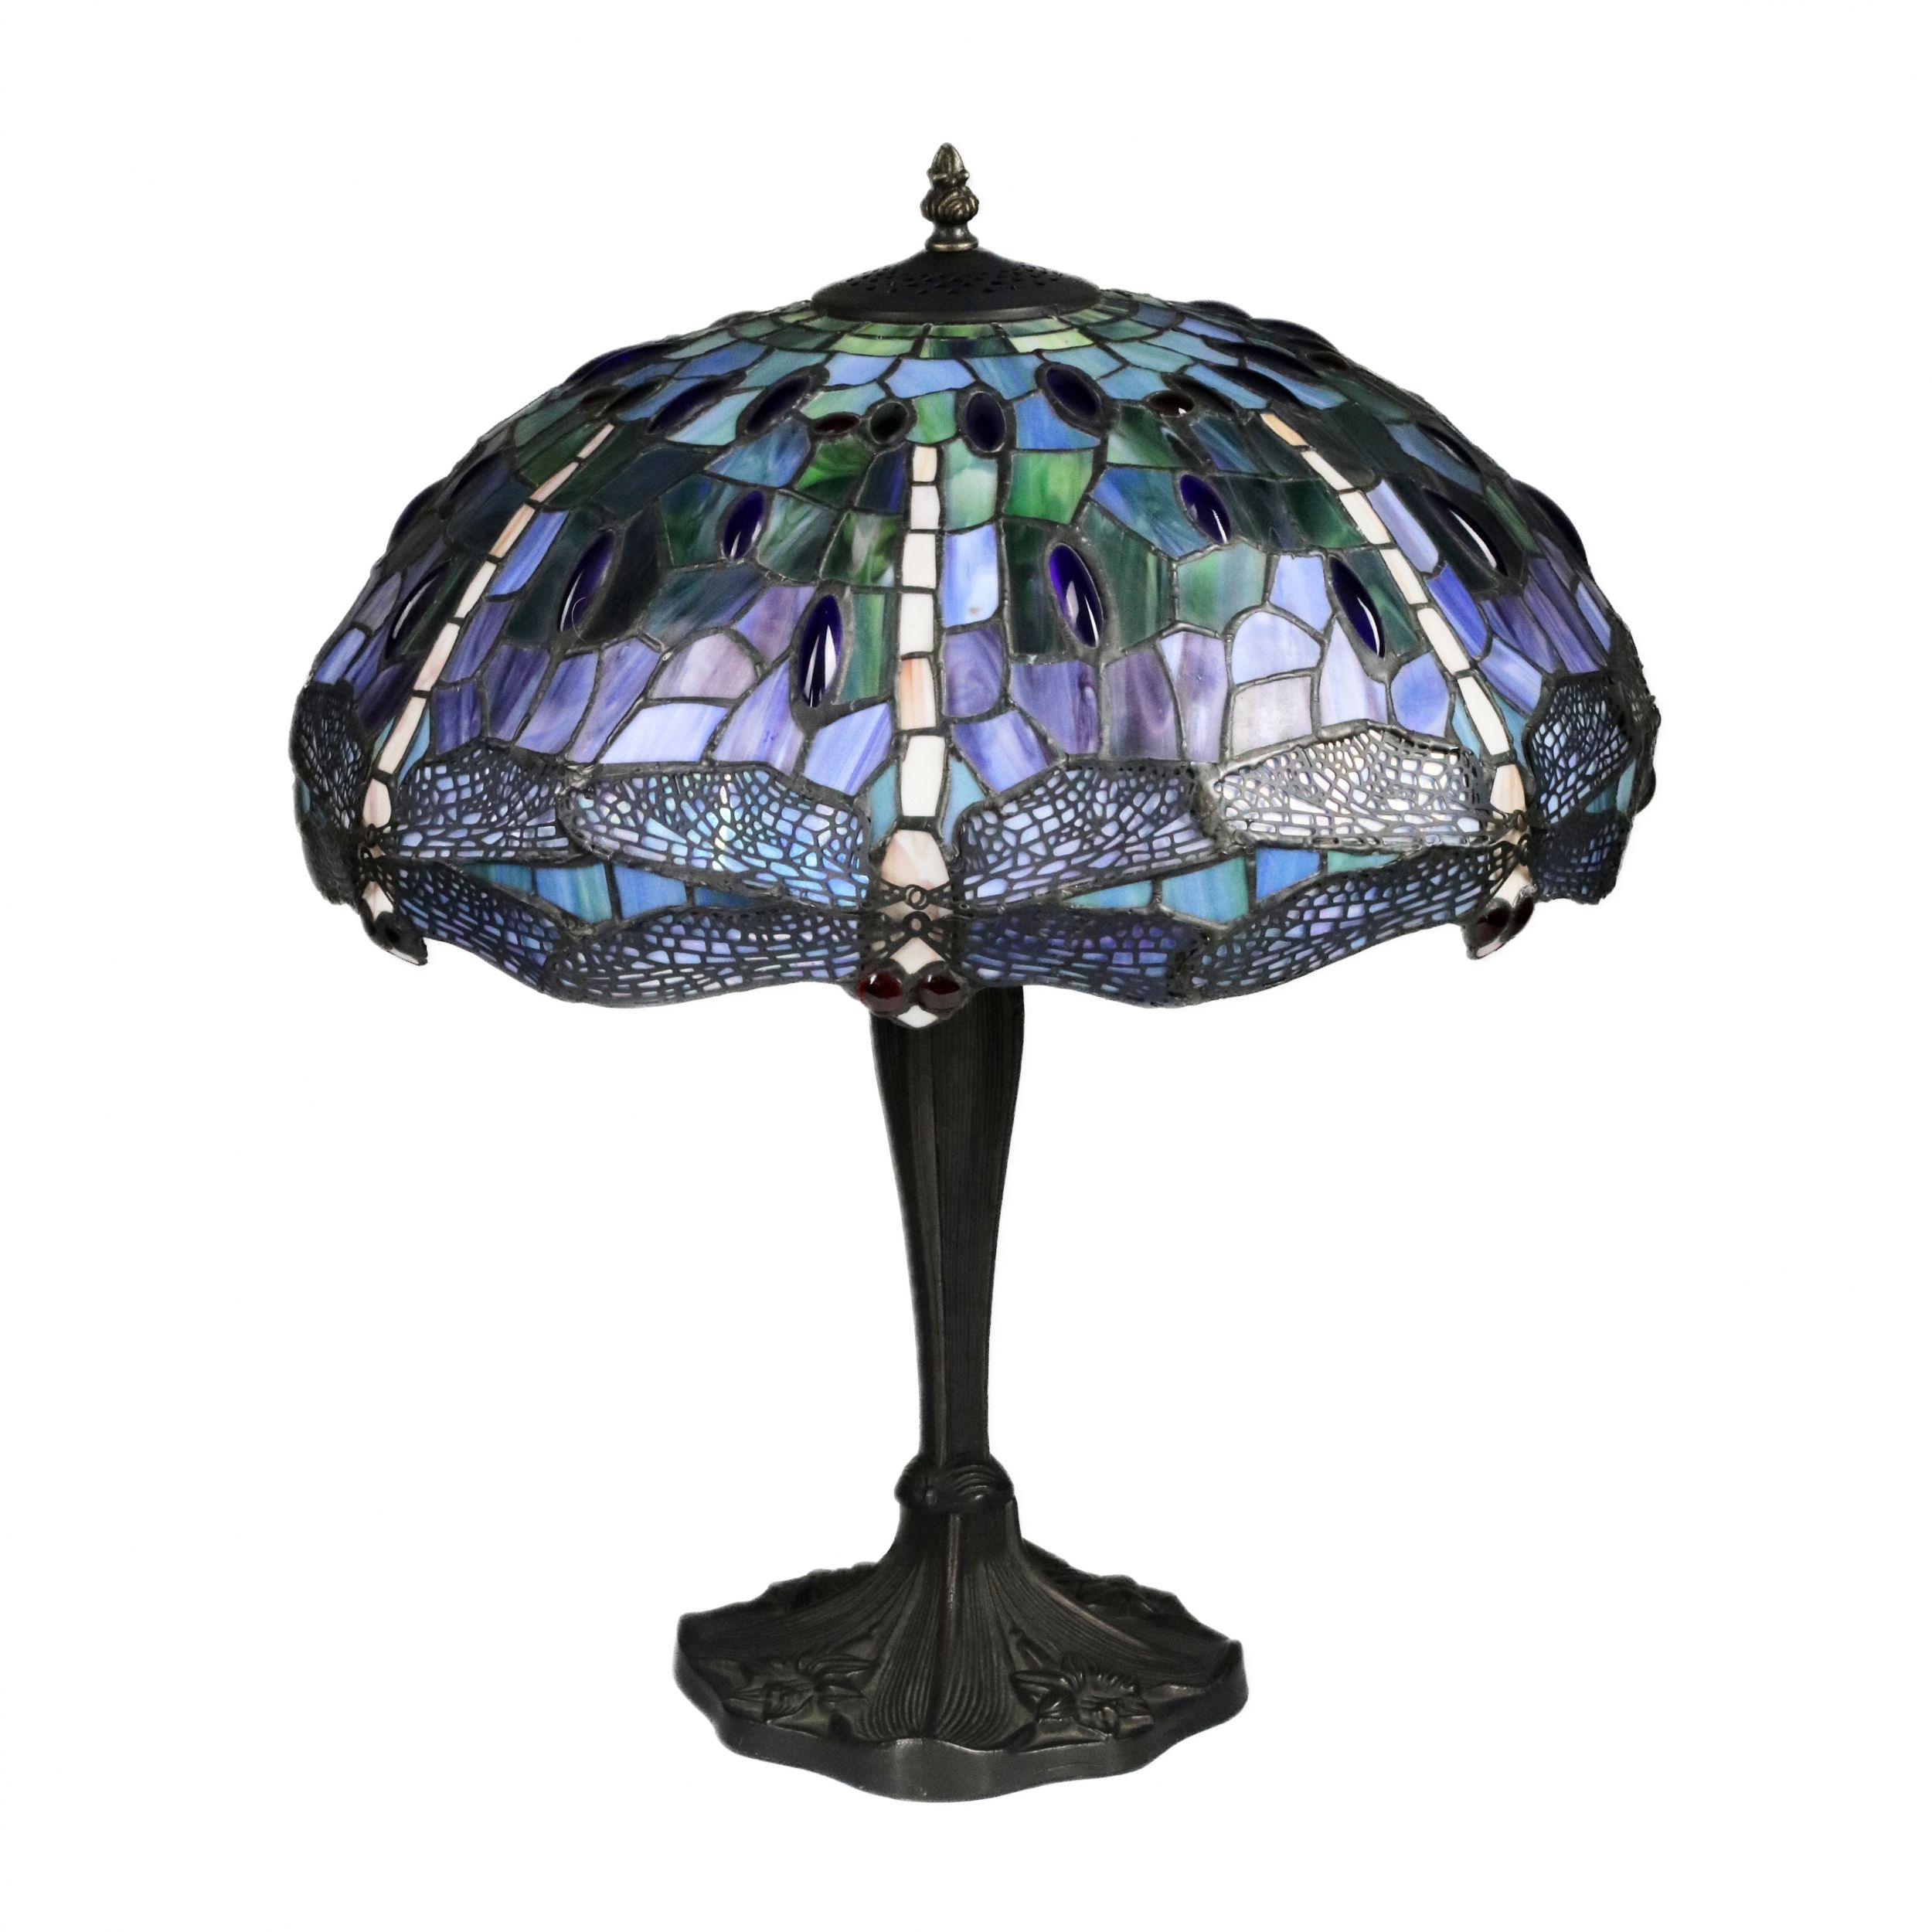 Stained-glass-lamp-in-Tiffany-style-20th-century-